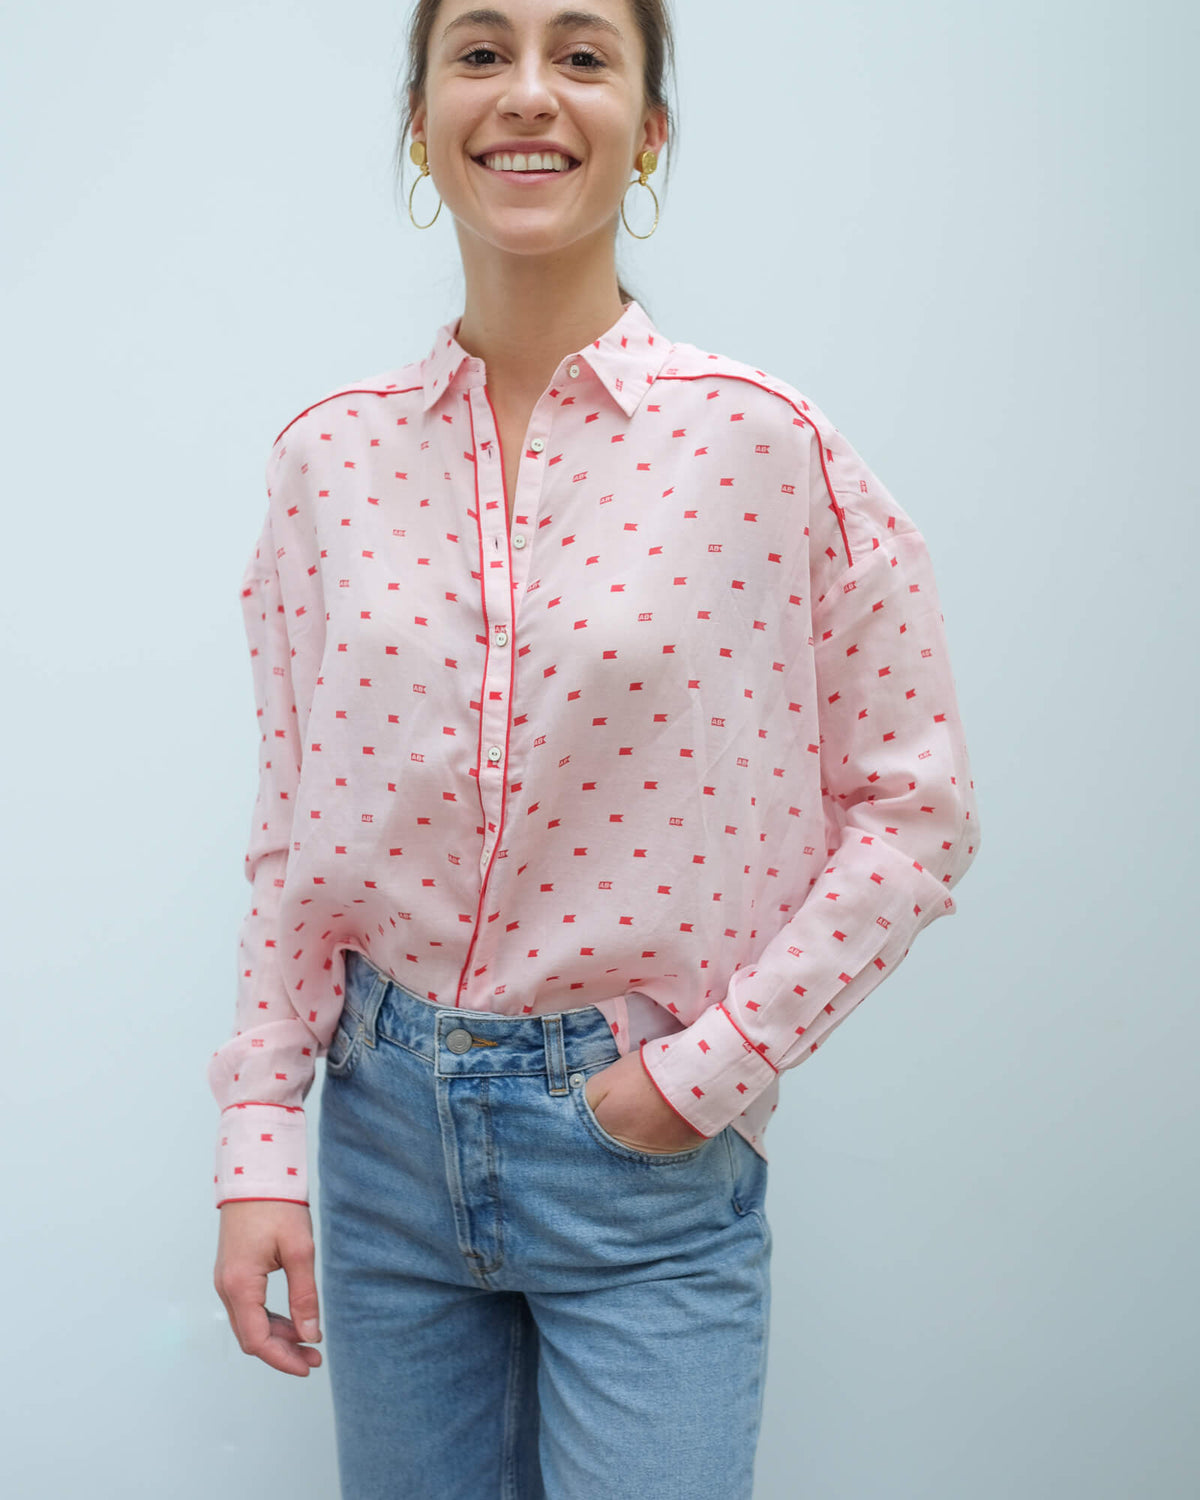 AB 150655 Boxy fit printed shirt in pink and red